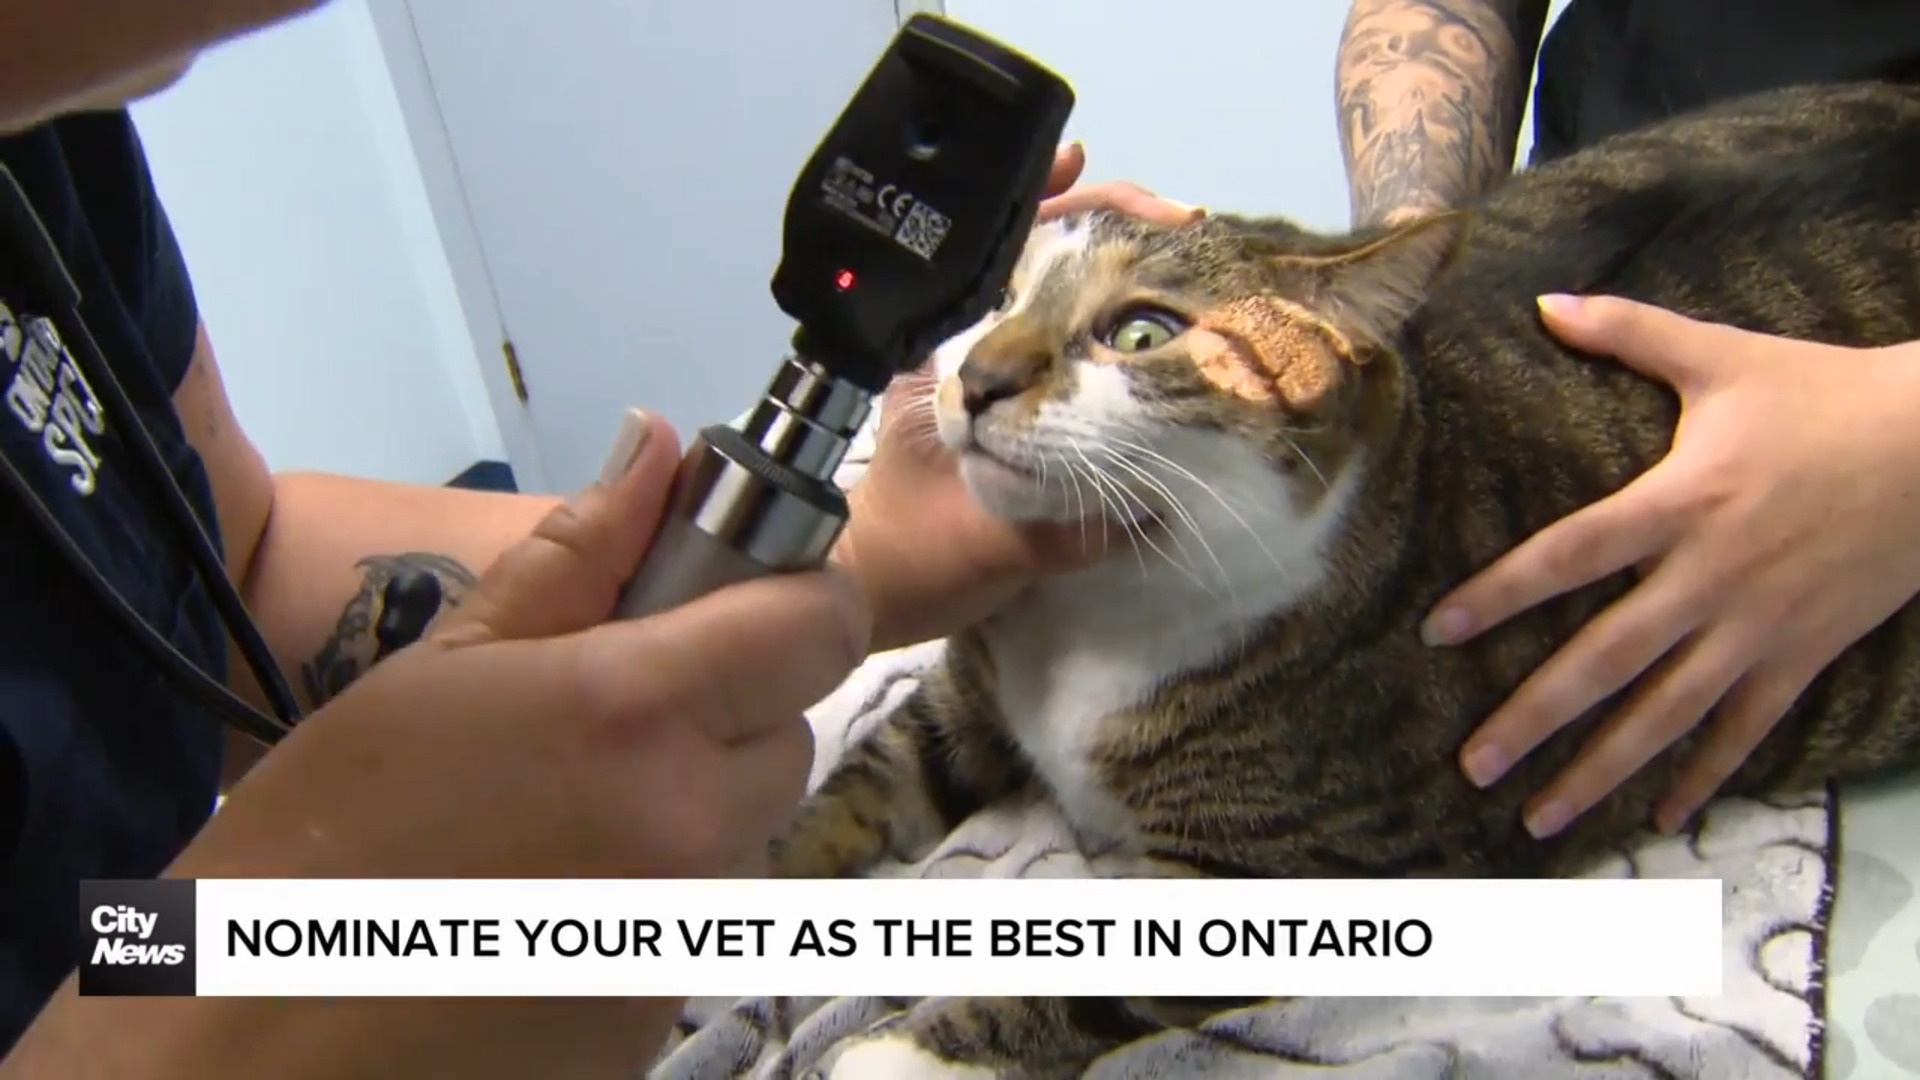 The OSPCA is looking for the best vet in Ontario